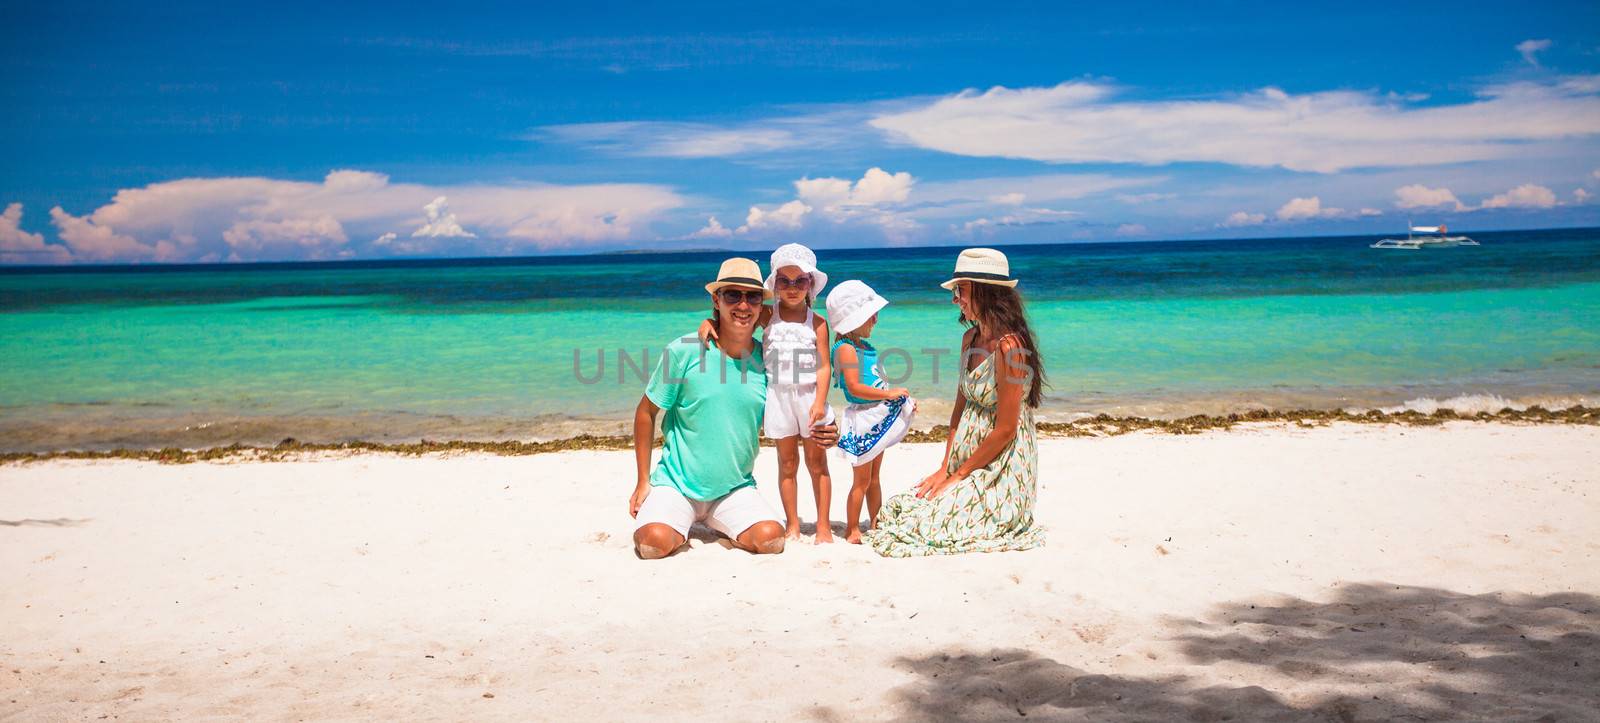 Family of four on beach vacation by travnikovstudio